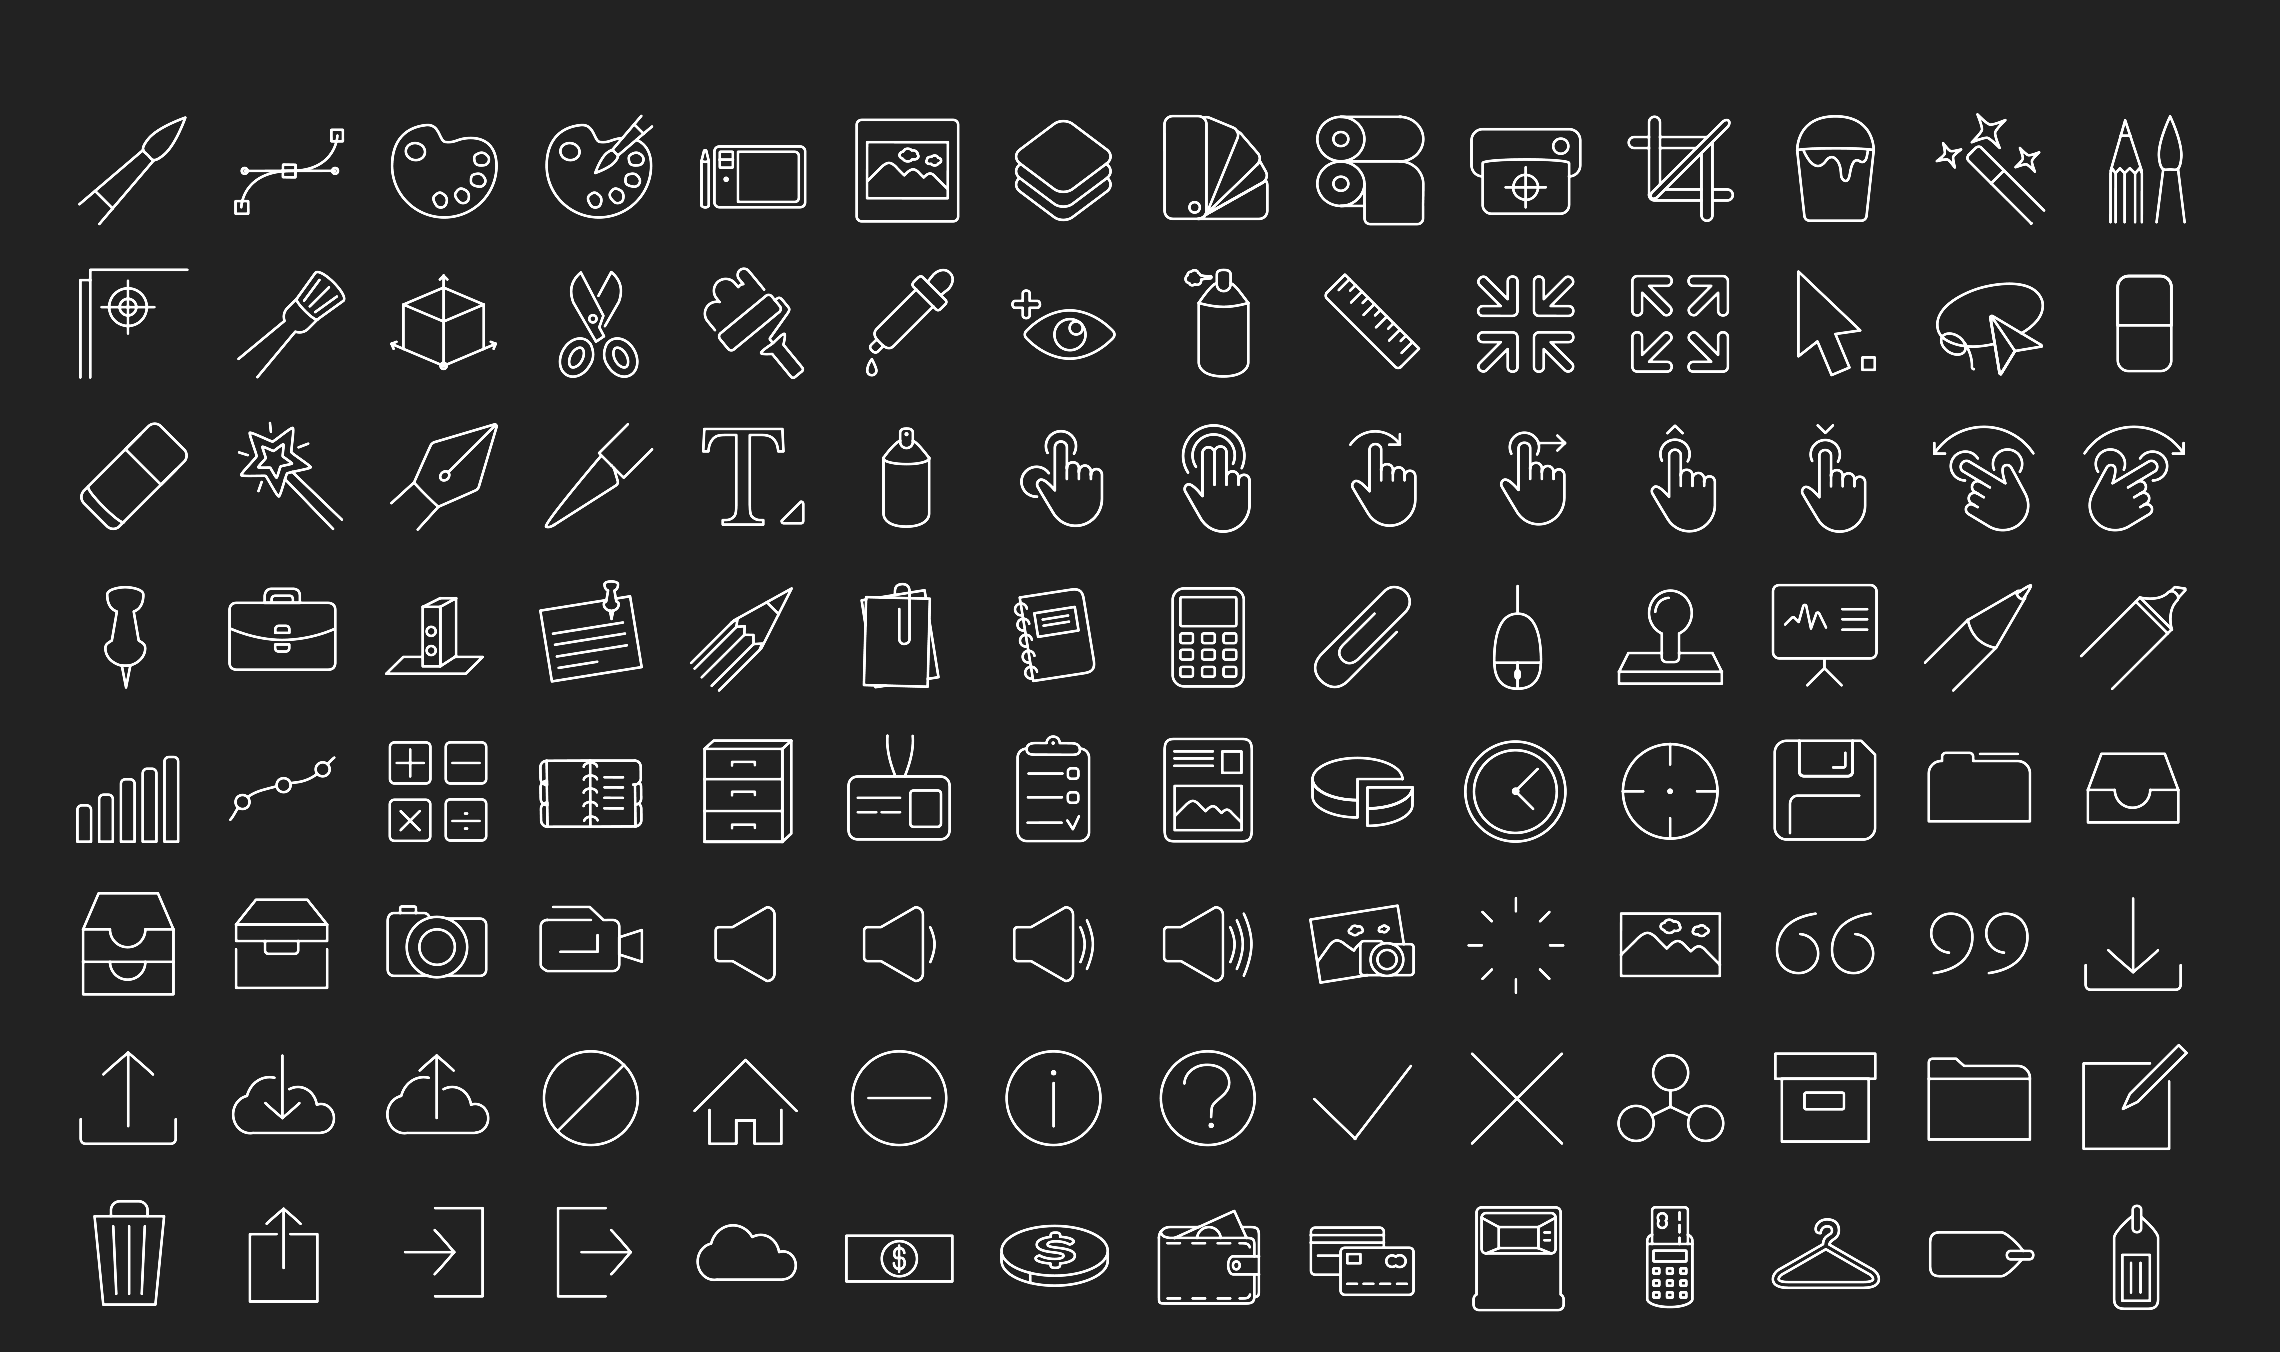 Download 2500 Flat Icons Vector Set Royalty Free